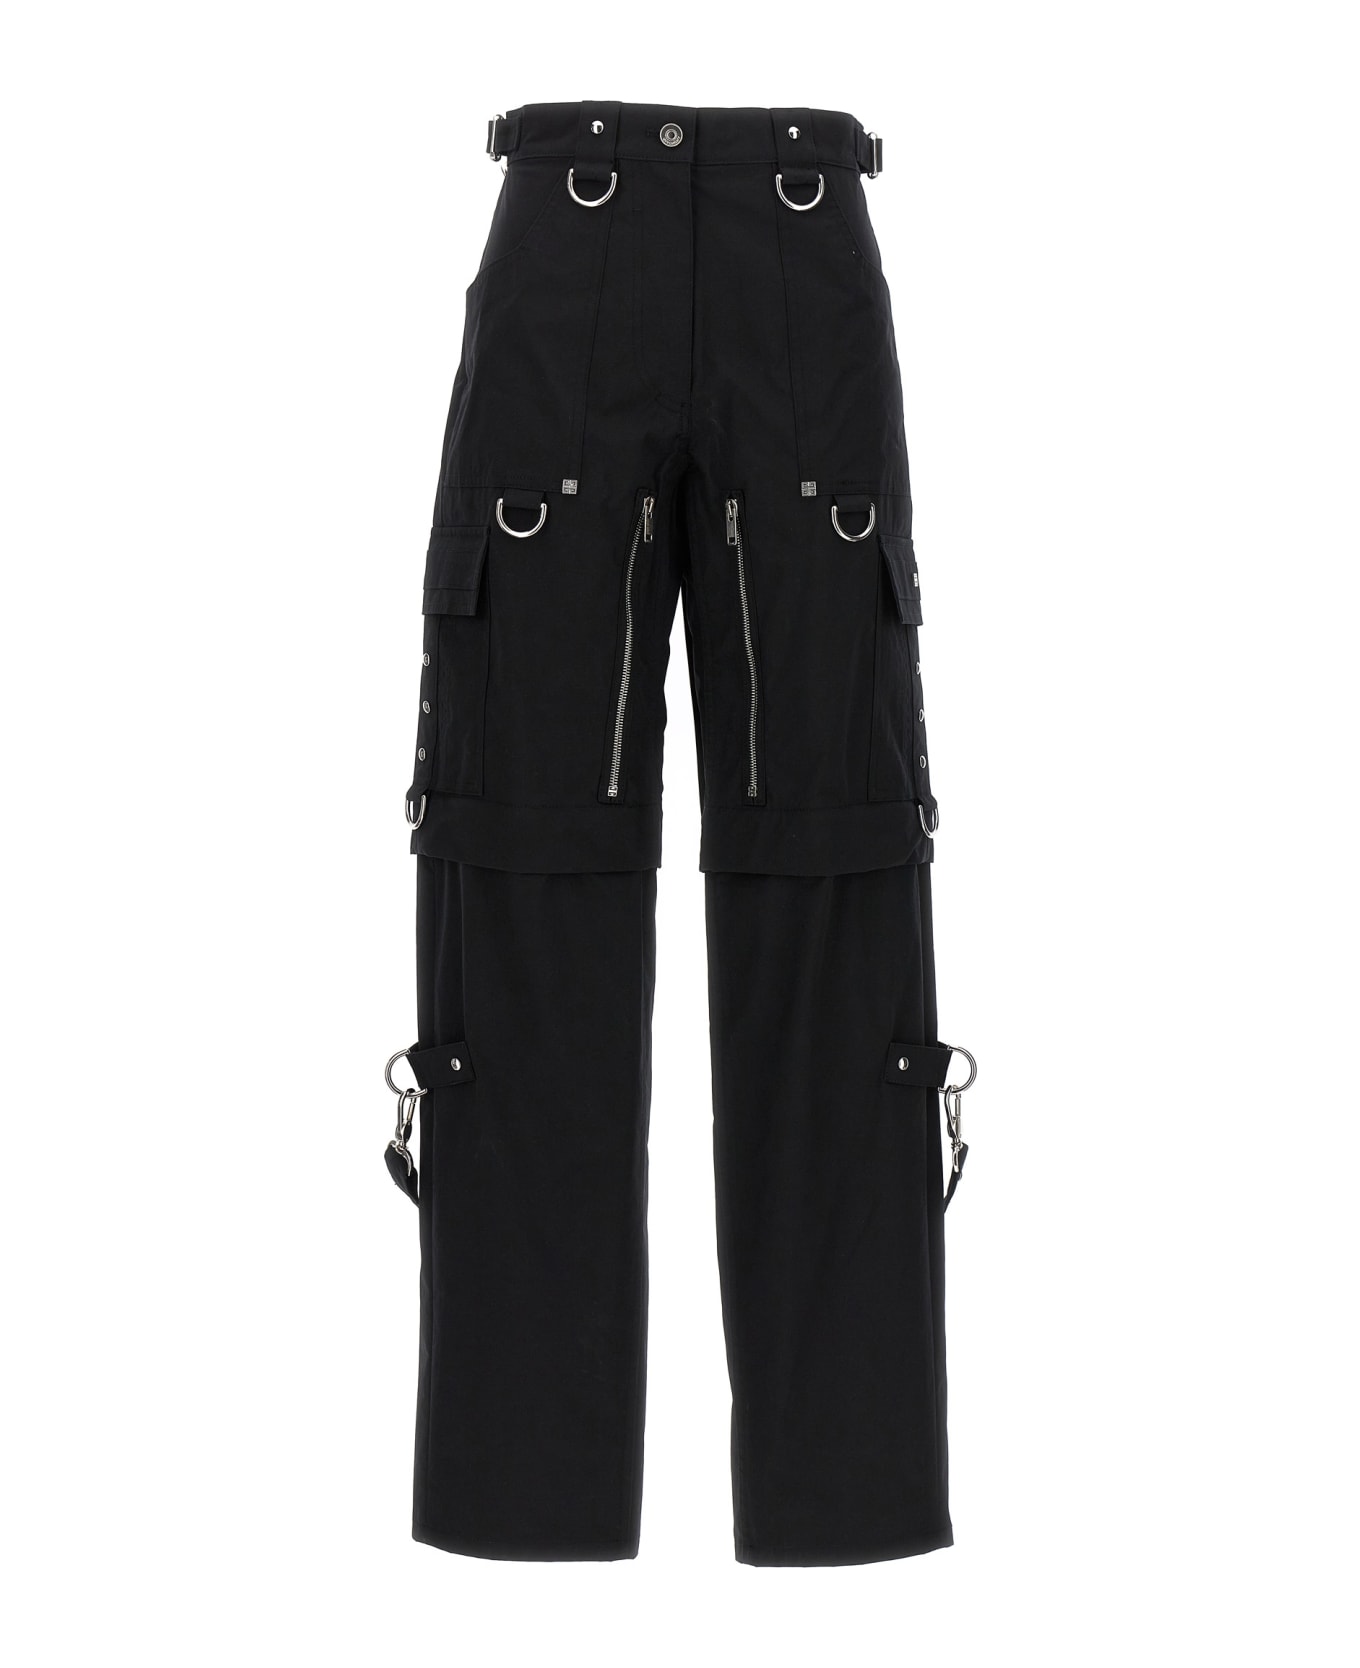 Givenchy Two In One Detachable Cargo Pants With Suspenders - black ボトムス